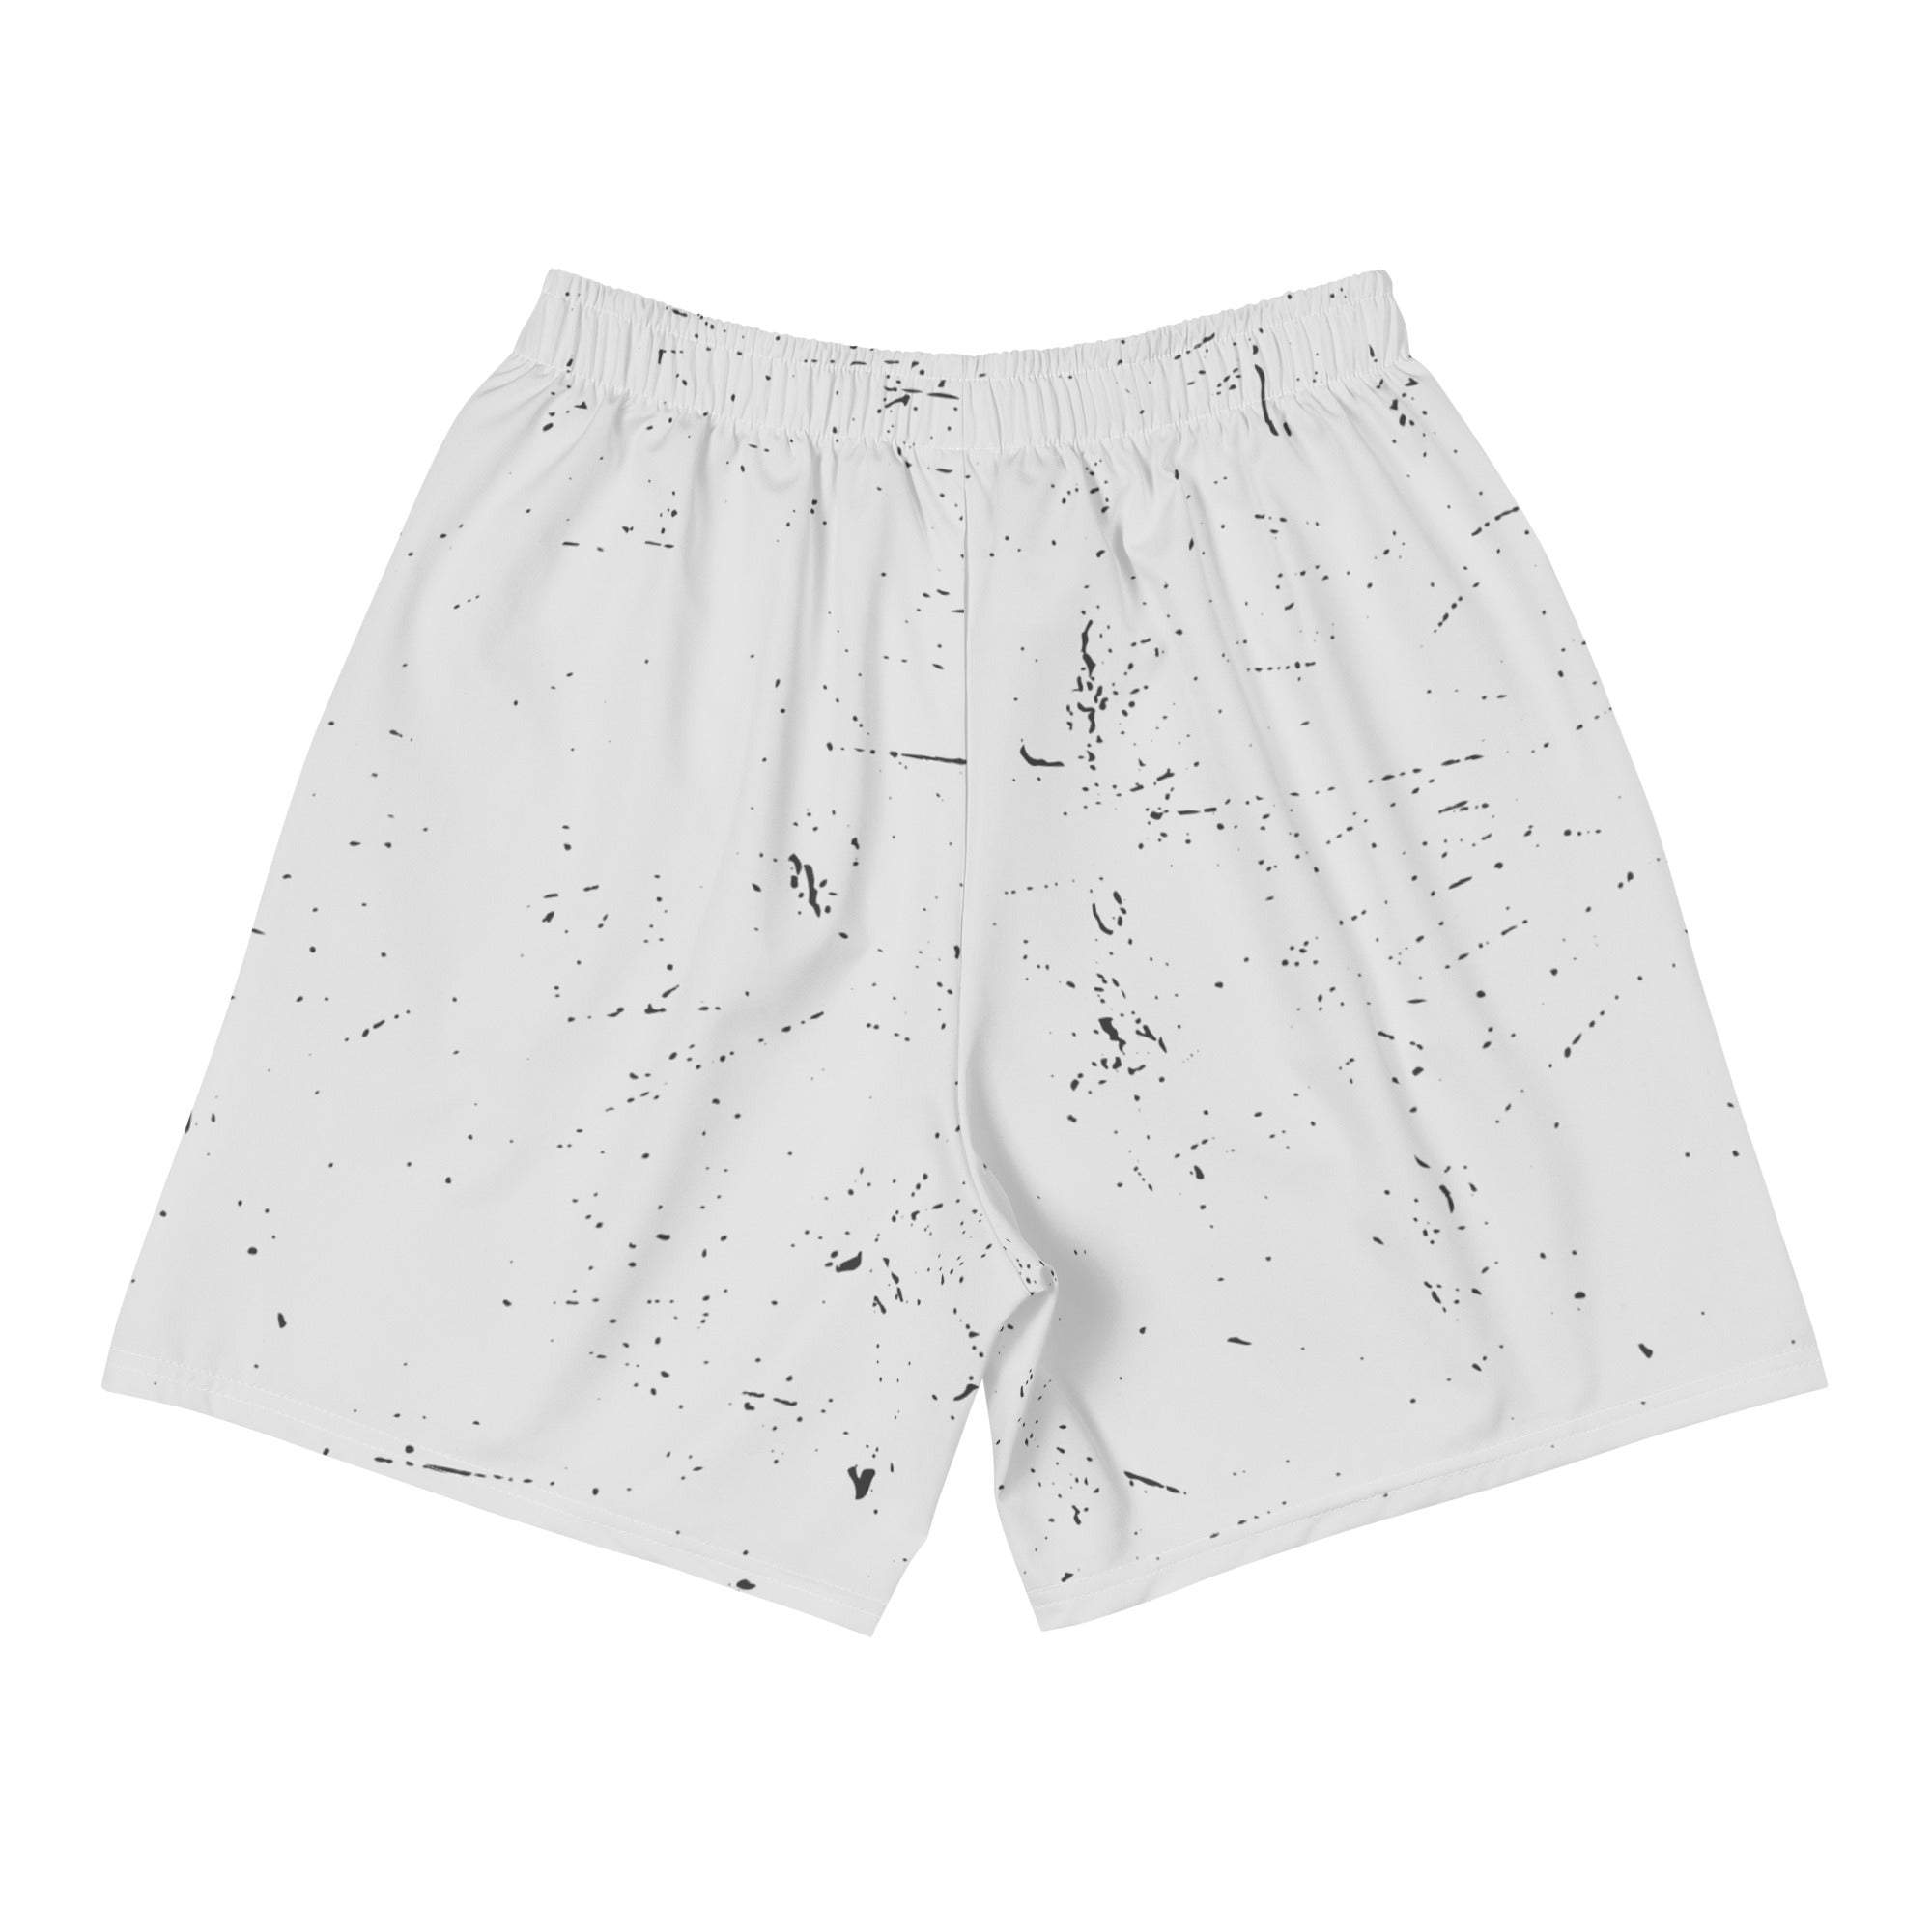 Grand Cities Men's Athletic Shorts